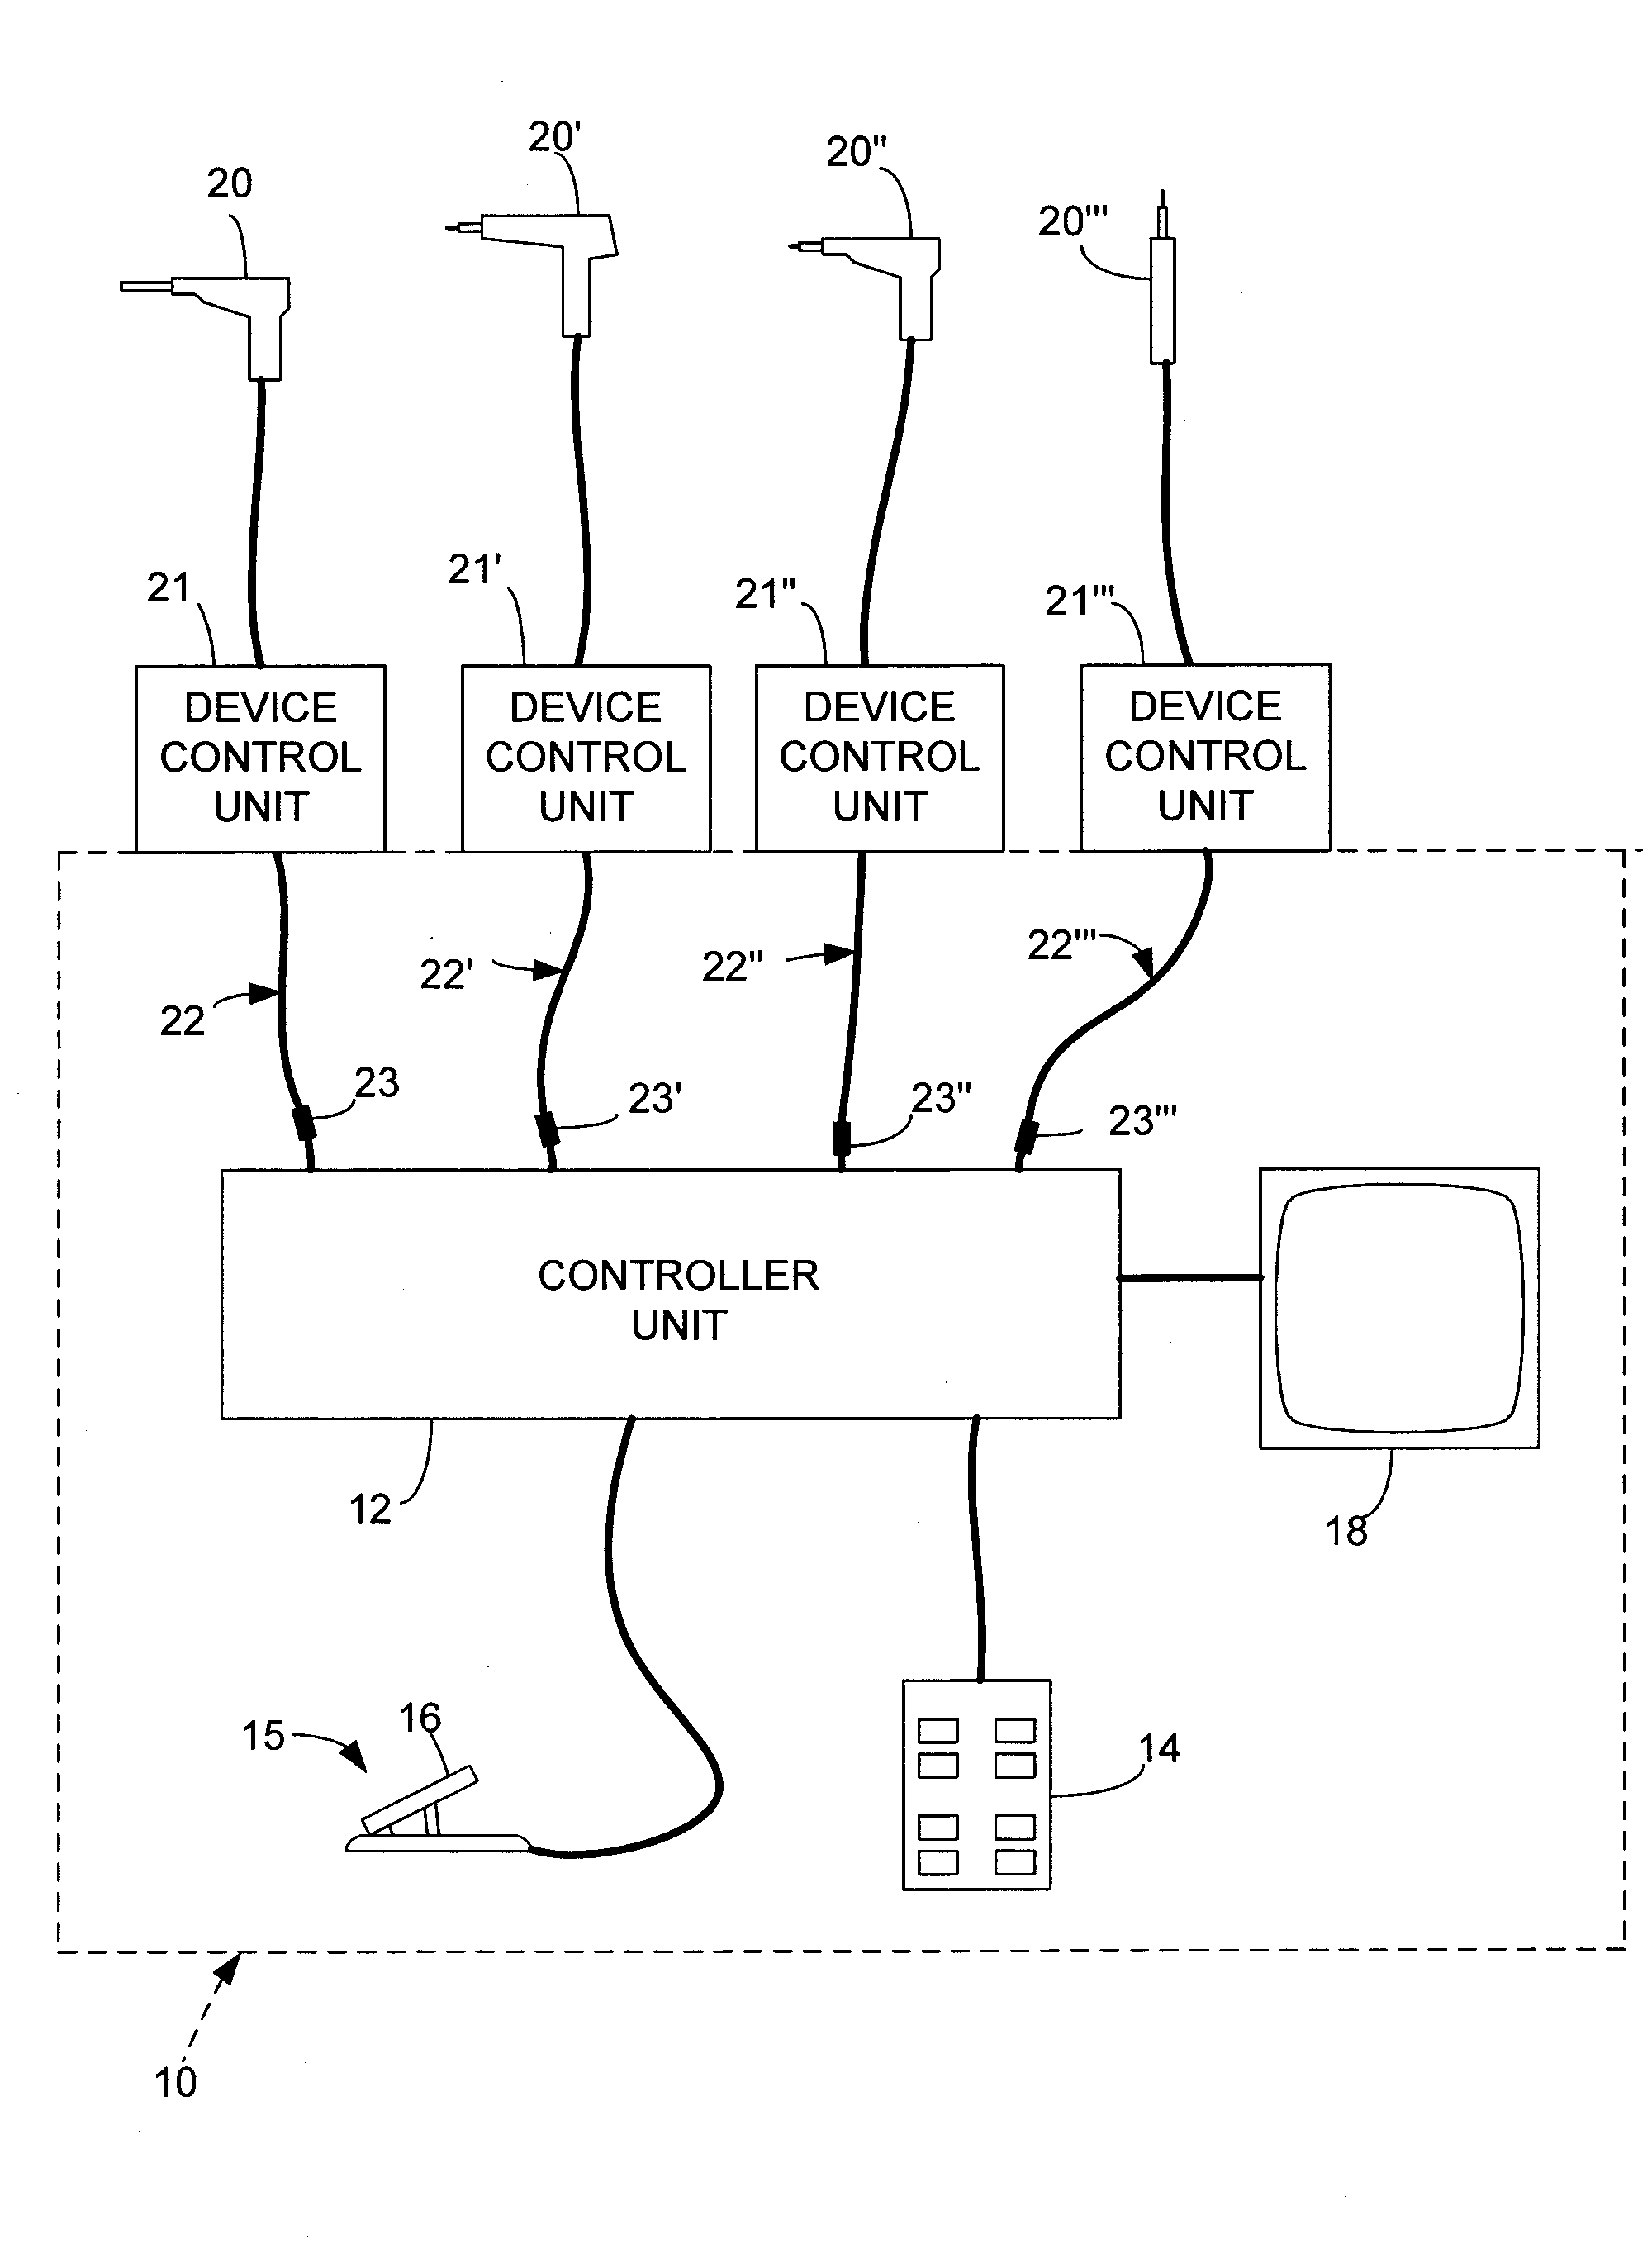 Electrosurgical control system